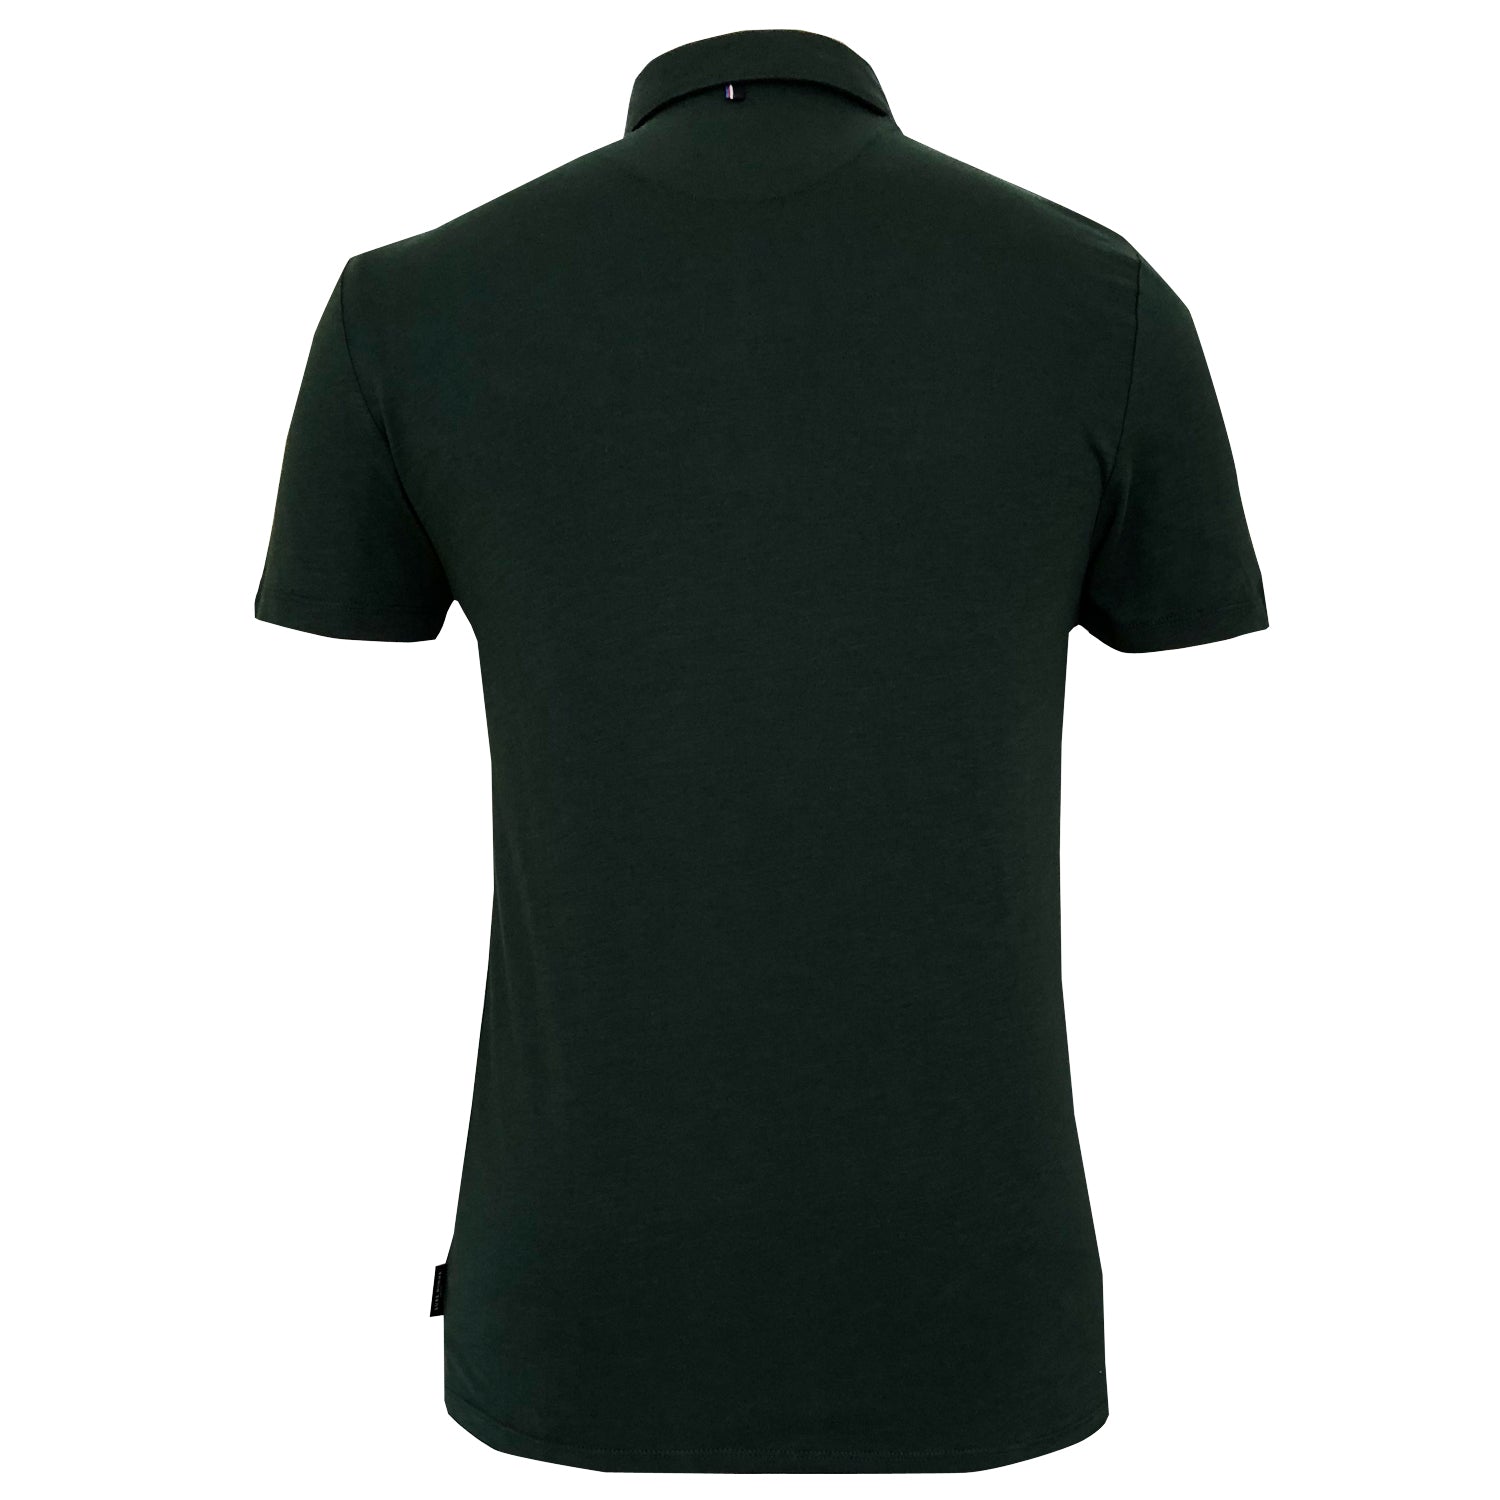 Luxe Homme Select - Gregory Polo - LabelledUp.com